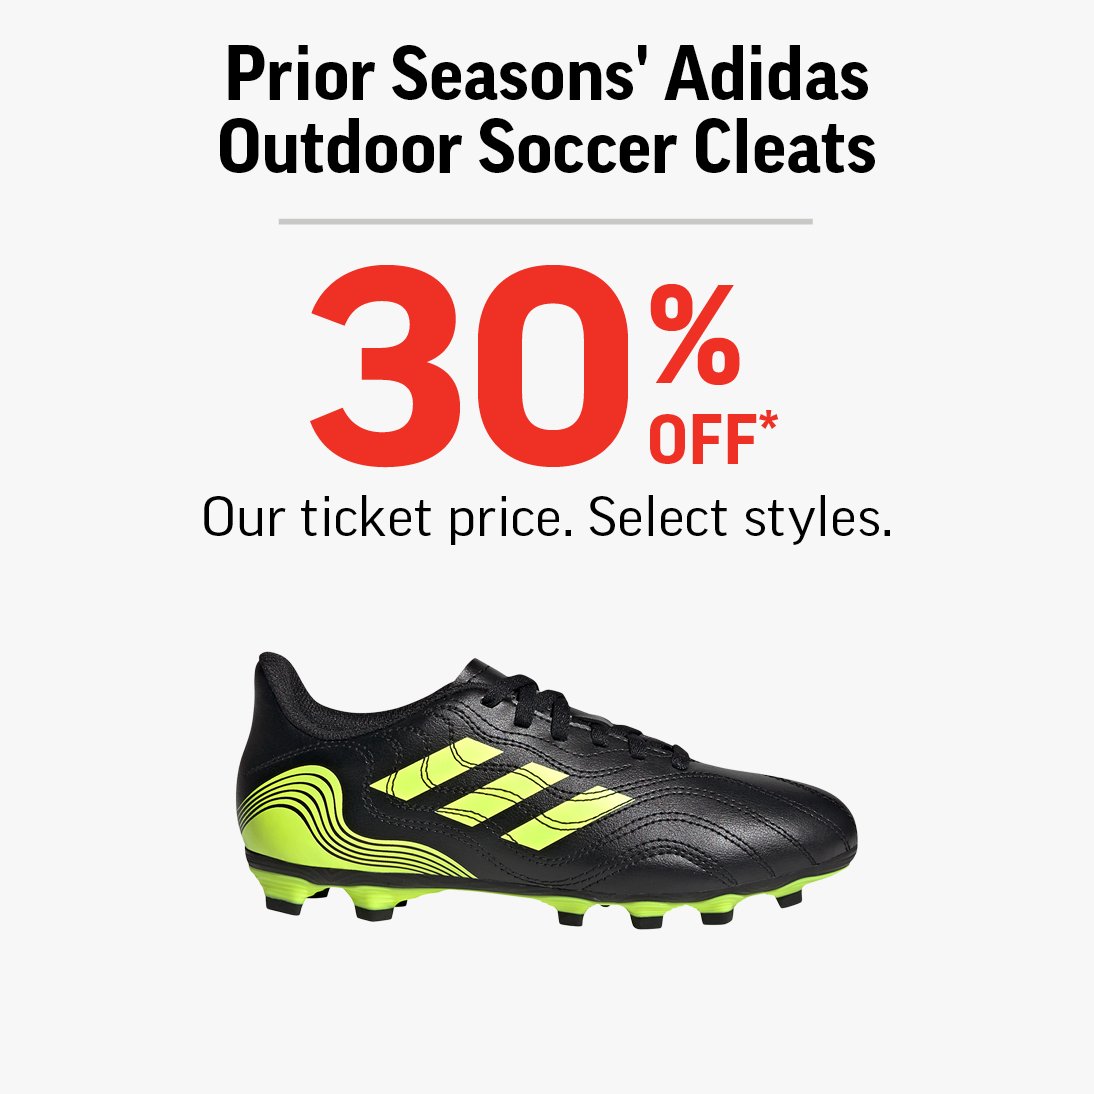 PRIOR SEASONS' ADIDAS OUTDOOR SOCCER CLEATS  30% OFF